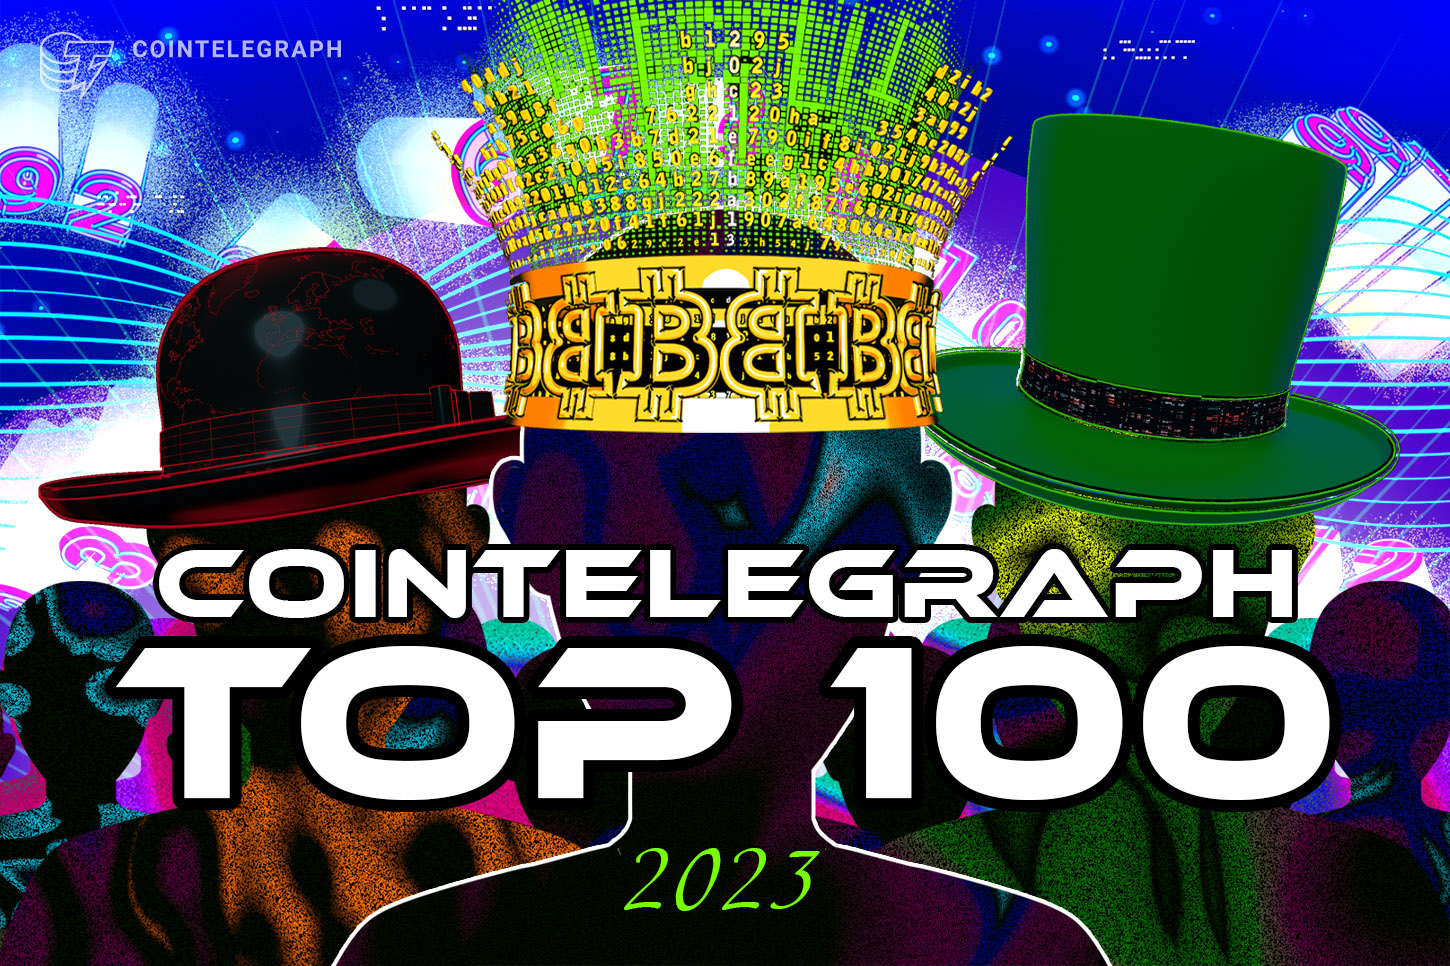 Cointelegraph launches the Top 100 list of crypto heroes and villains, 2023 edition